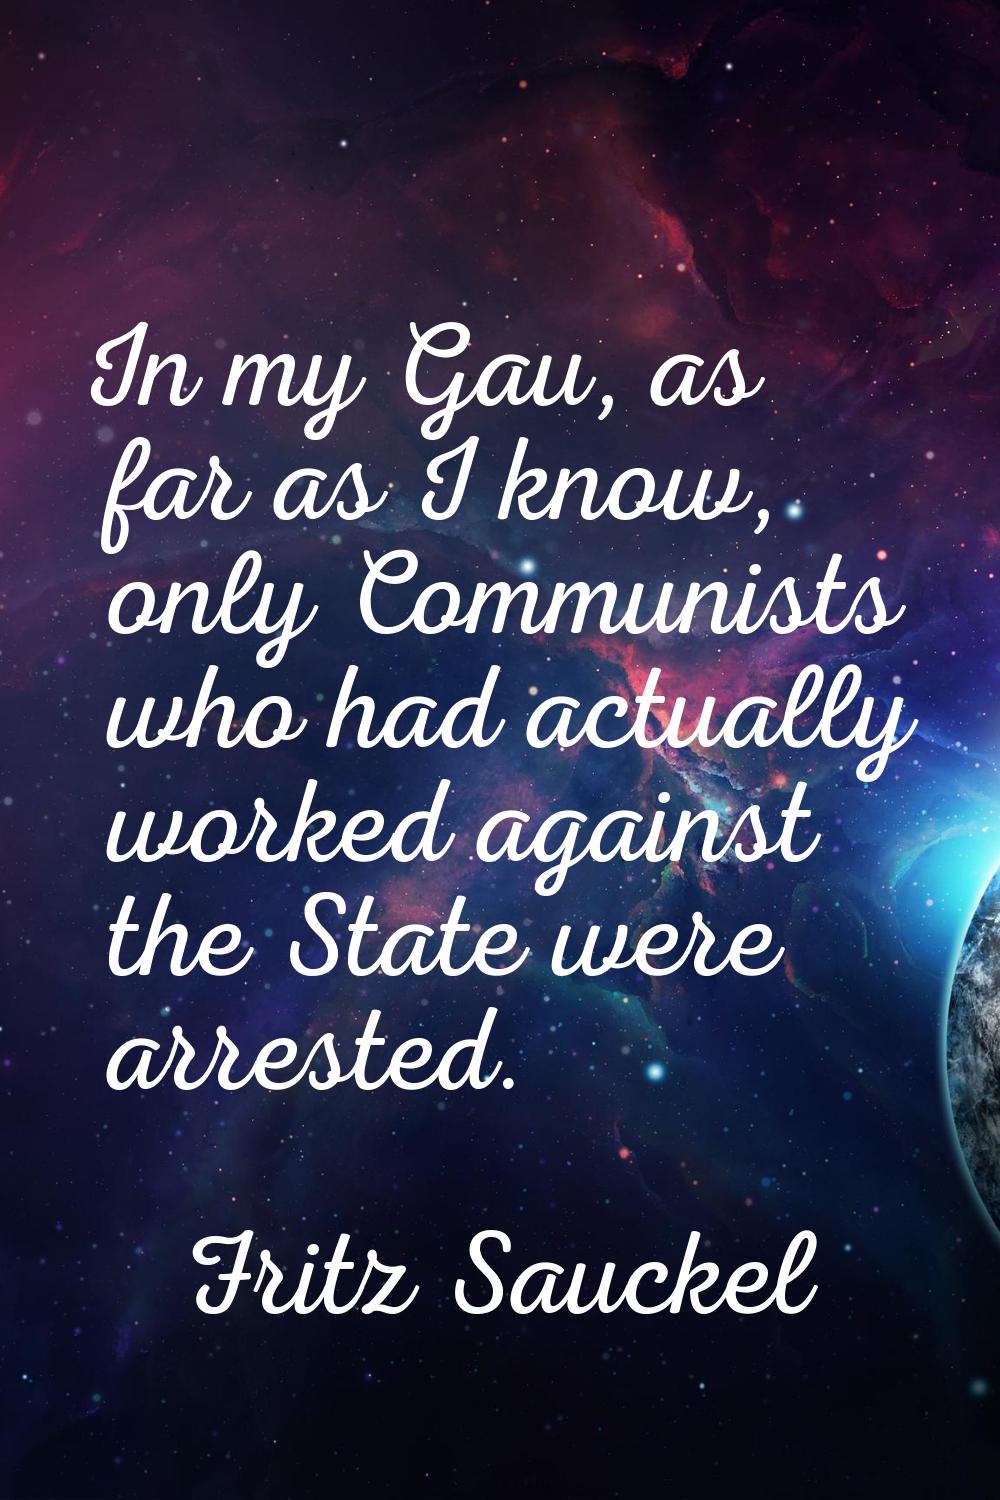 In my Gau, as far as I know, only Communists who had actually worked against the State were arreste